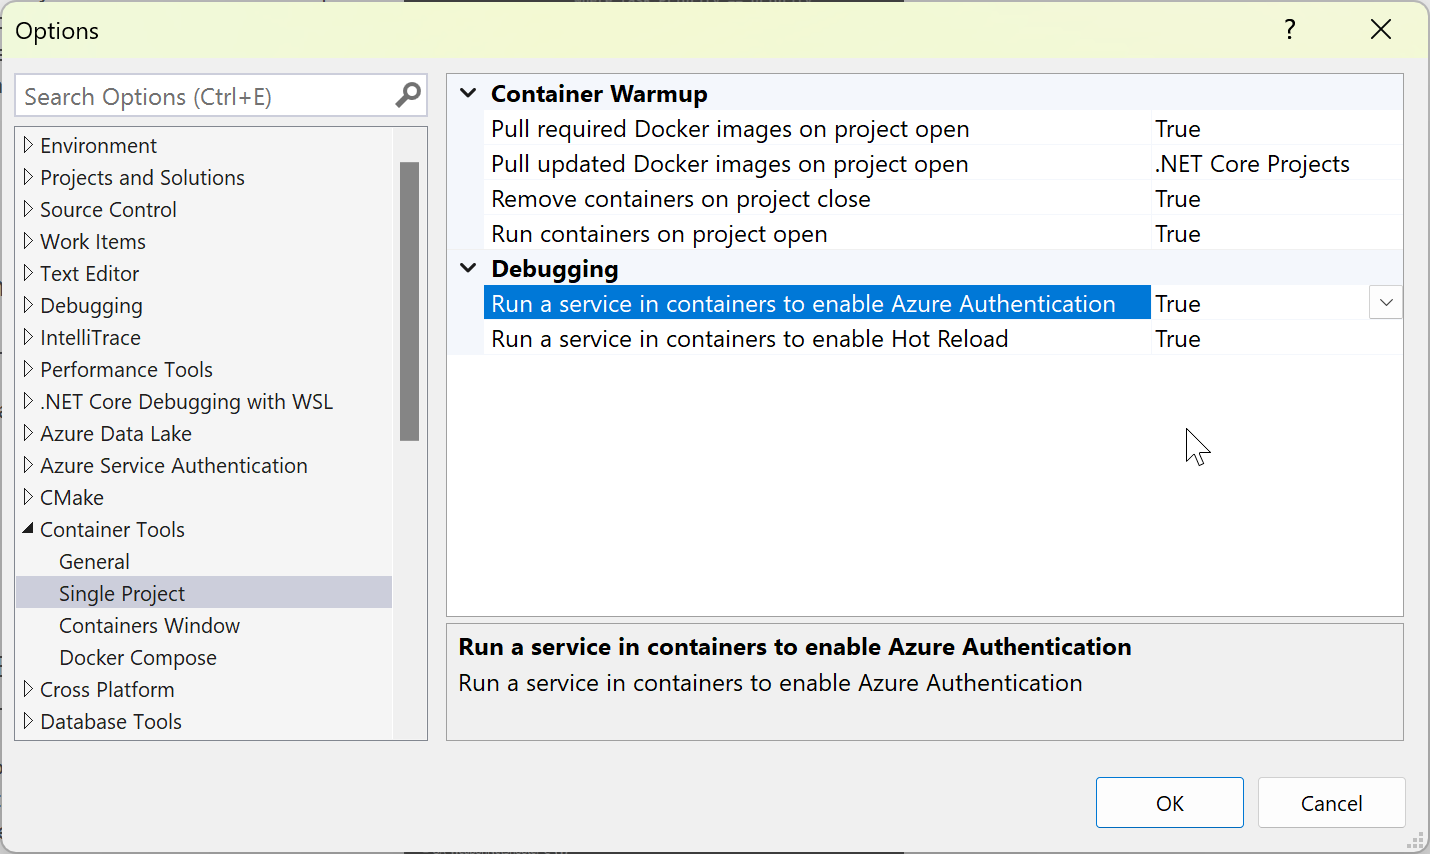 Visual Studio Container Tools options, showing: Kill containers on project close, Pull required Docker images on project open, Run containers on project open, Run a service in containers to enable Azure Authentication, and Run a service in containers to enable Hot Reload.